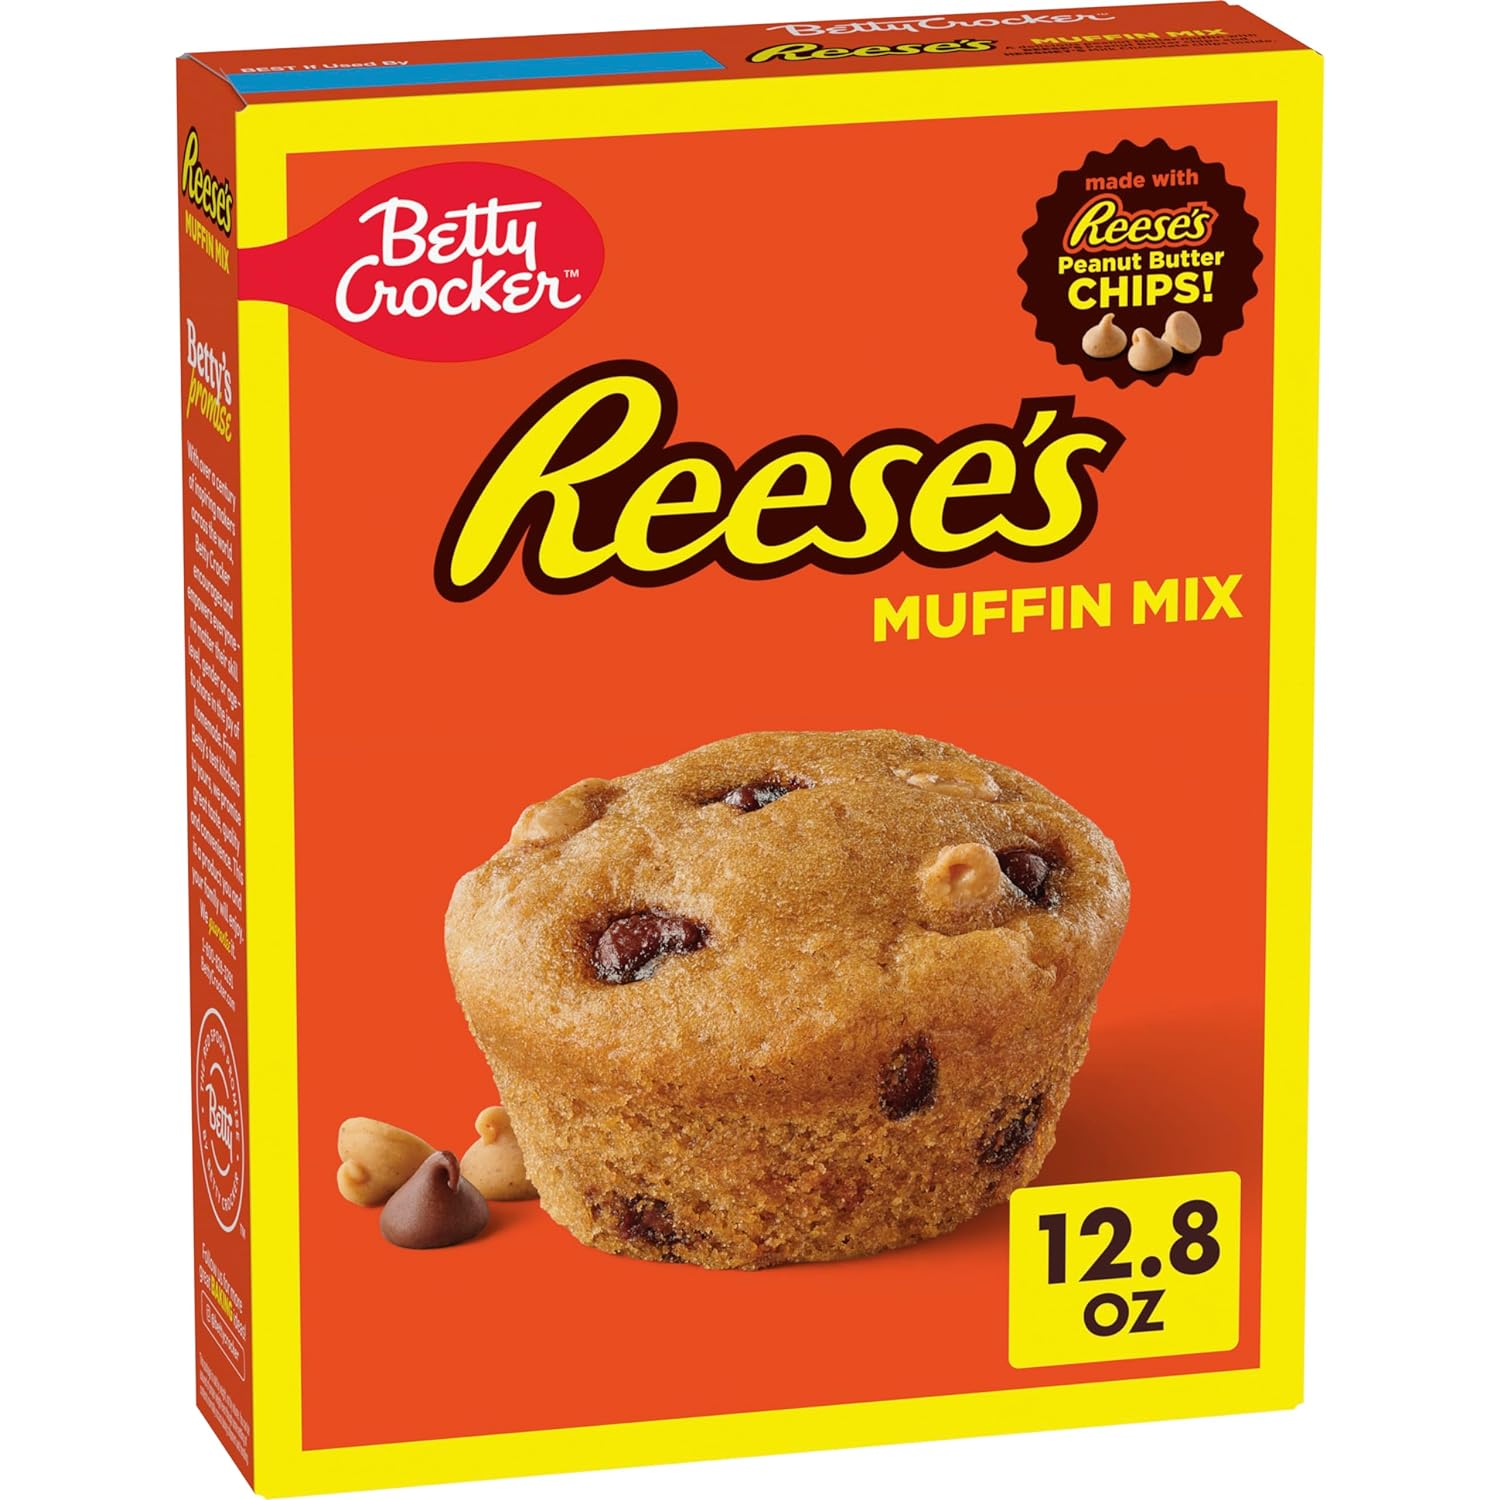 Betty Crocker REESE'S Peanut Butter Muffin Mix, Baking Mix Made With REESE’S Peanut Butter Chips And HERSHEY’S Milk Chocolate Chips, 12.8 oz